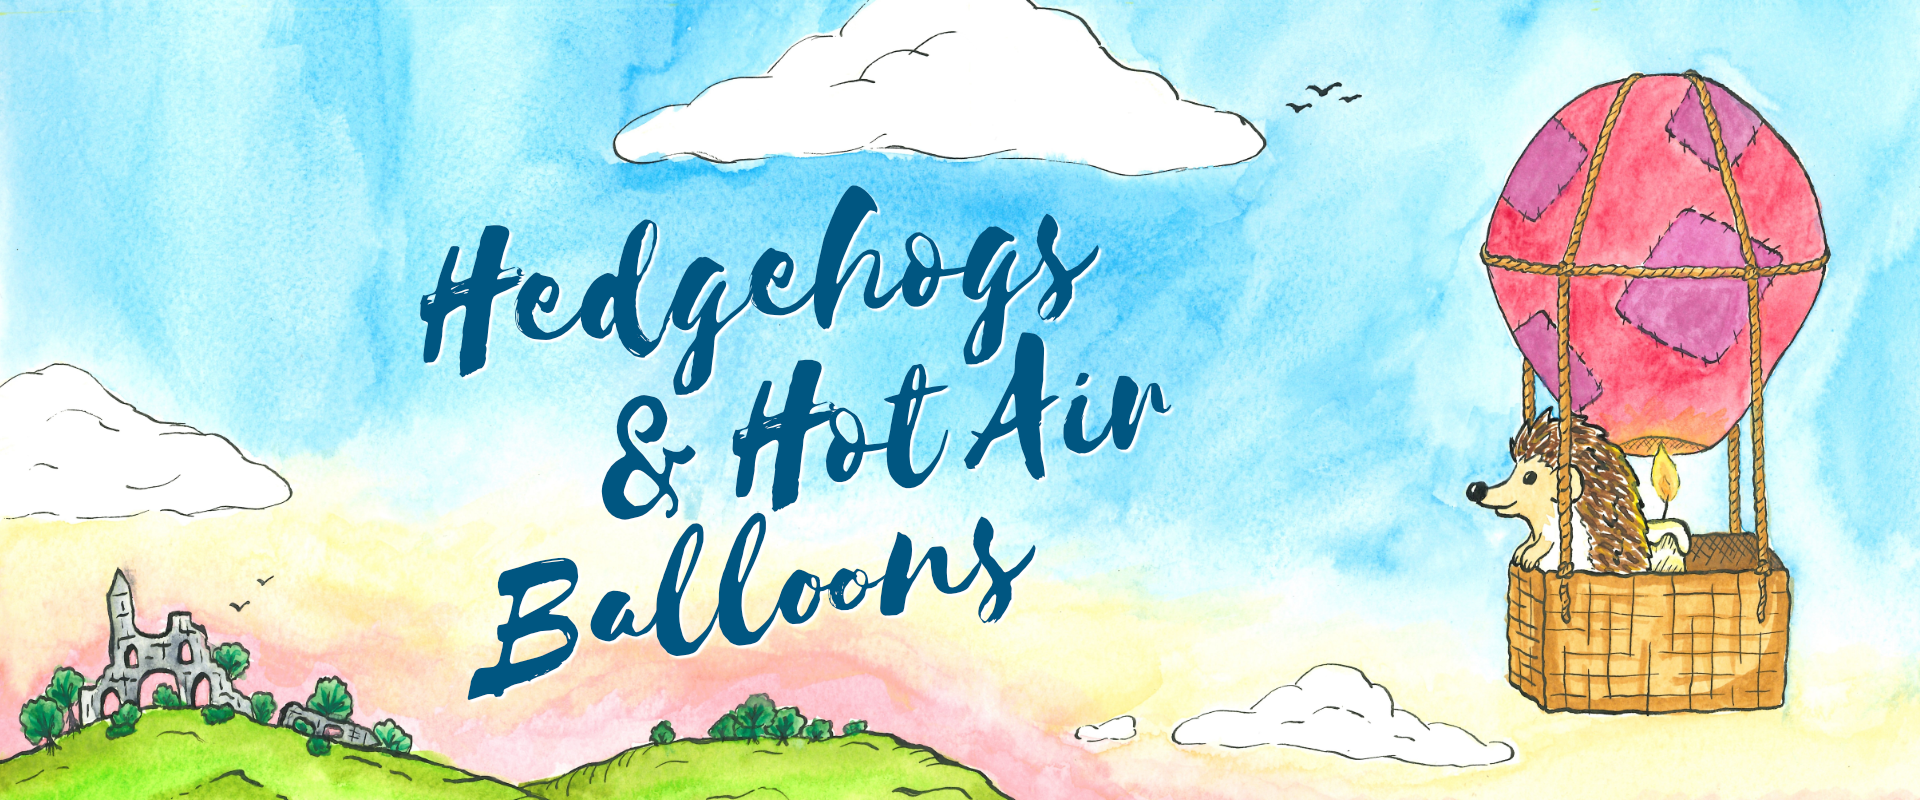 Hedgehogs and Hot Air Balloons